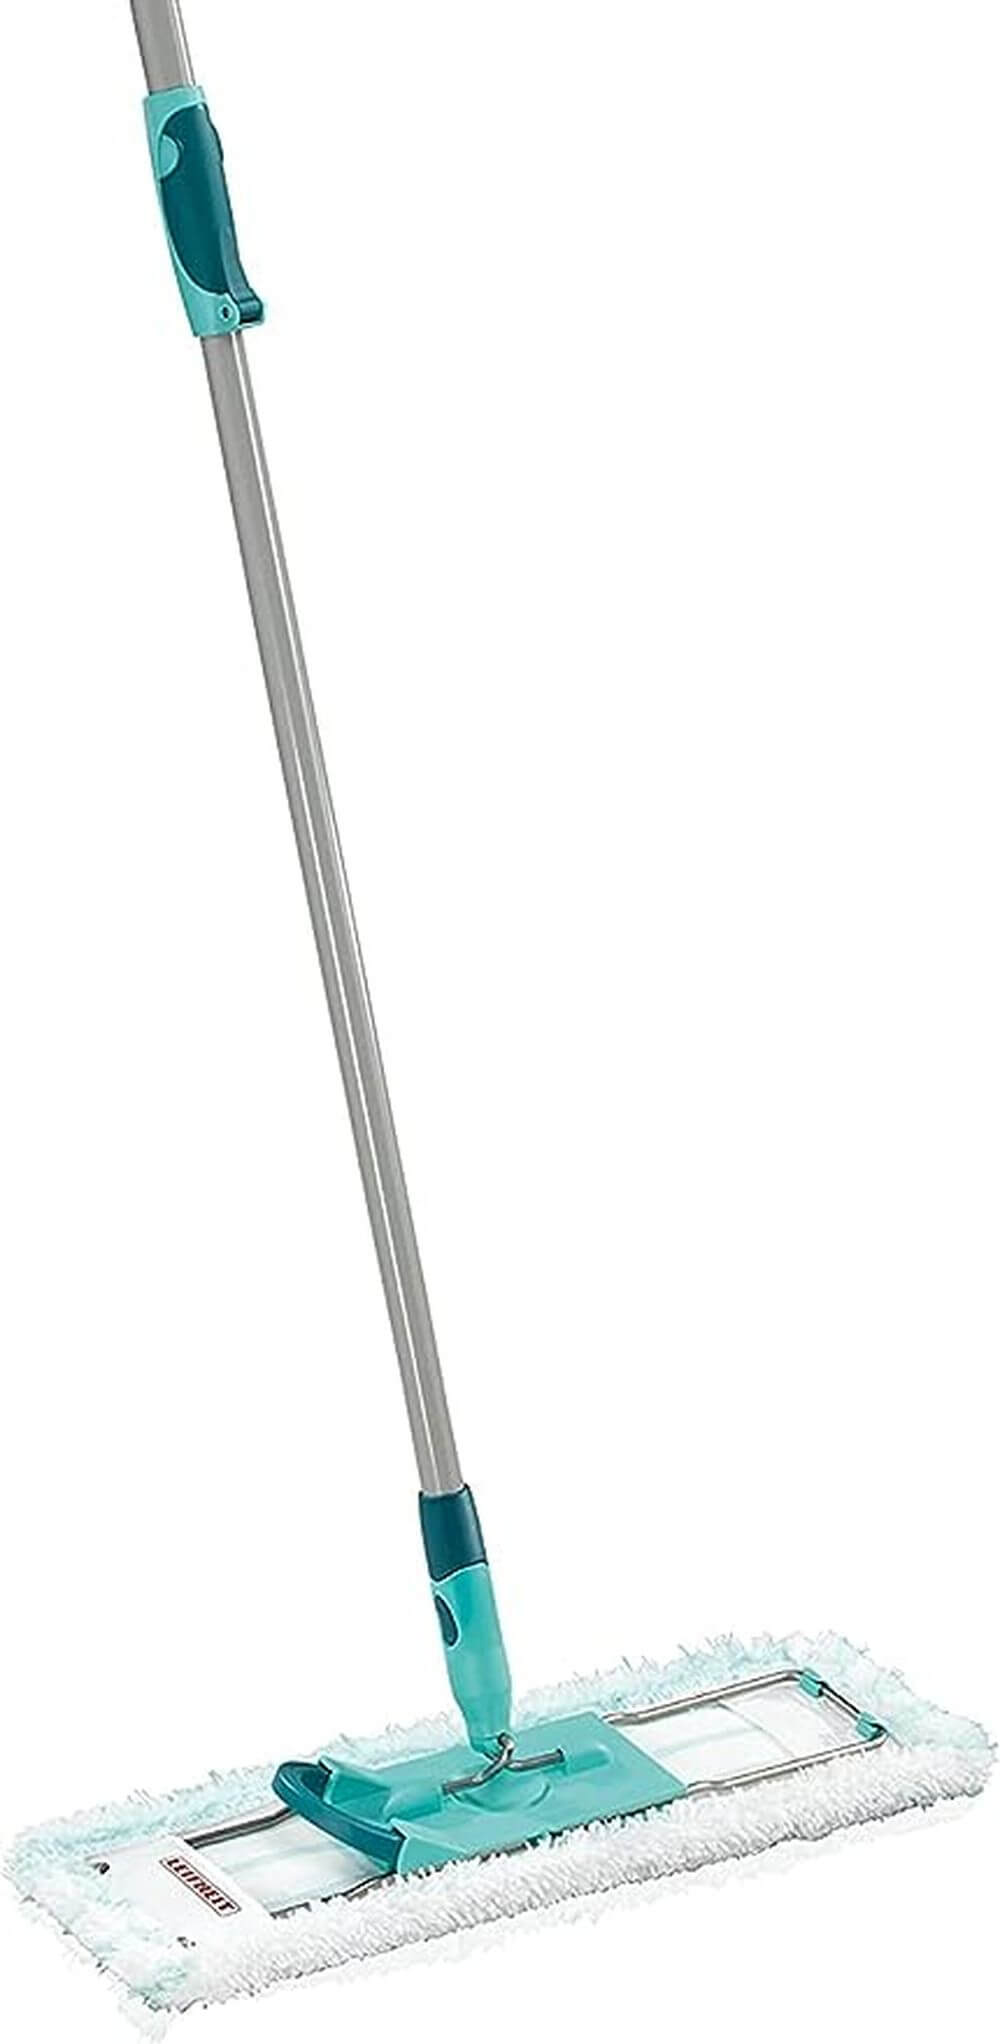 Leifheit Micro Duo Floor Wiper - LAUNDRY - Cleaning - Soko and Co